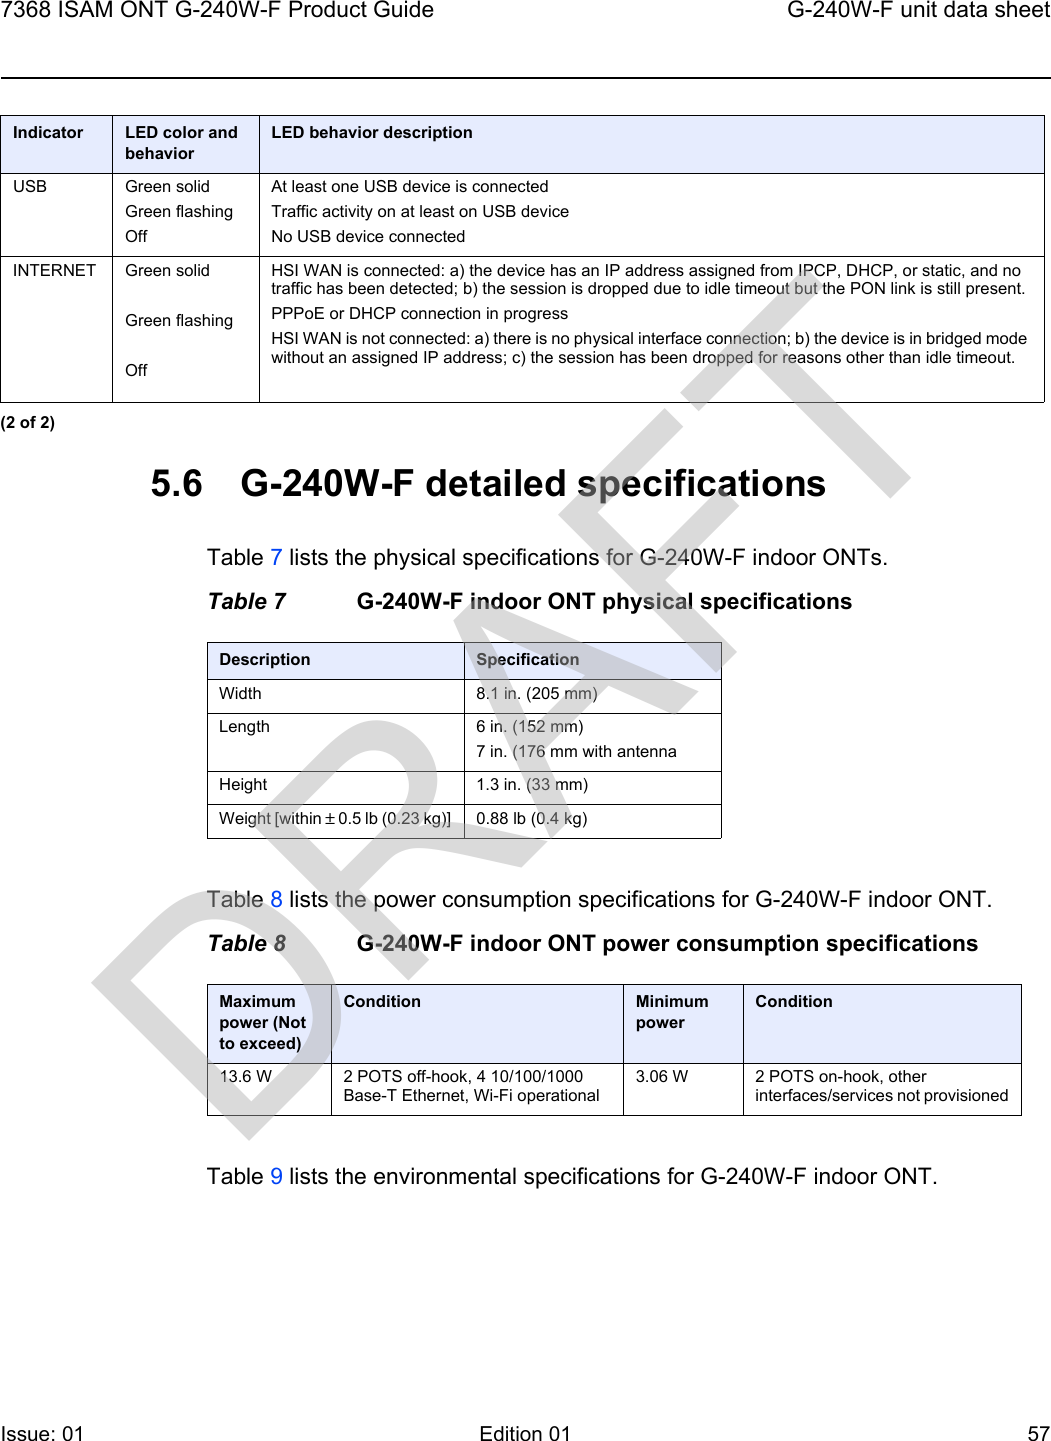 7368 ISAM ONT G-240W-F Product Guide G-240W-F unit data sheetIssue: 01 Edition 01 57 5.6 G-240W-F detailed specificationsTable 7 lists the physical specifications for G-240W-F indoor ONTs.Table 7 G-240W-F indoor ONT physical specificationsTable 8 lists the power consumption specifications for G-240W-F indoor ONT.Table 8 G-240W-F indoor ONT power consumption specificationsTable 9 lists the environmental specifications for G-240W-F indoor ONT.USB Green solidGreen flashingOffAt least one USB device is connectedTraffic activity on at least on USB deviceNo USB device connectedINTERNET Green solid Green flashingOffHSI WAN is connected: a) the device has an IP address assigned from IPCP, DHCP, or static, and no traffic has been detected; b) the session is dropped due to idle timeout but the PON link is still present.PPPoE or DHCP connection in progressHSI WAN is not connected: a) there is no physical interface connection; b) the device is in bridged mode without an assigned IP address; c) the session has been dropped for reasons other than idle timeout.Indicator LED color and behaviorLED behavior description(2 of 2)Description SpecificationWidth 8.1 in. (205 mm)Length 6 in. (152 mm)7 in. (176 mm with antennaHeight 1.3 in. (33 mm)Weight [within ± 0.5 lb (0.23 kg)] 0.88 lb (0.4 kg)Maximum power (Not to exceed)Condition Minimum powerCondition13.6 W 2 POTS off-hook, 4 10/100/1000 Base-T Ethernet, Wi-Fi operational3.06 W 2 POTS on-hook, other interfaces/services not provisionedDRAFT